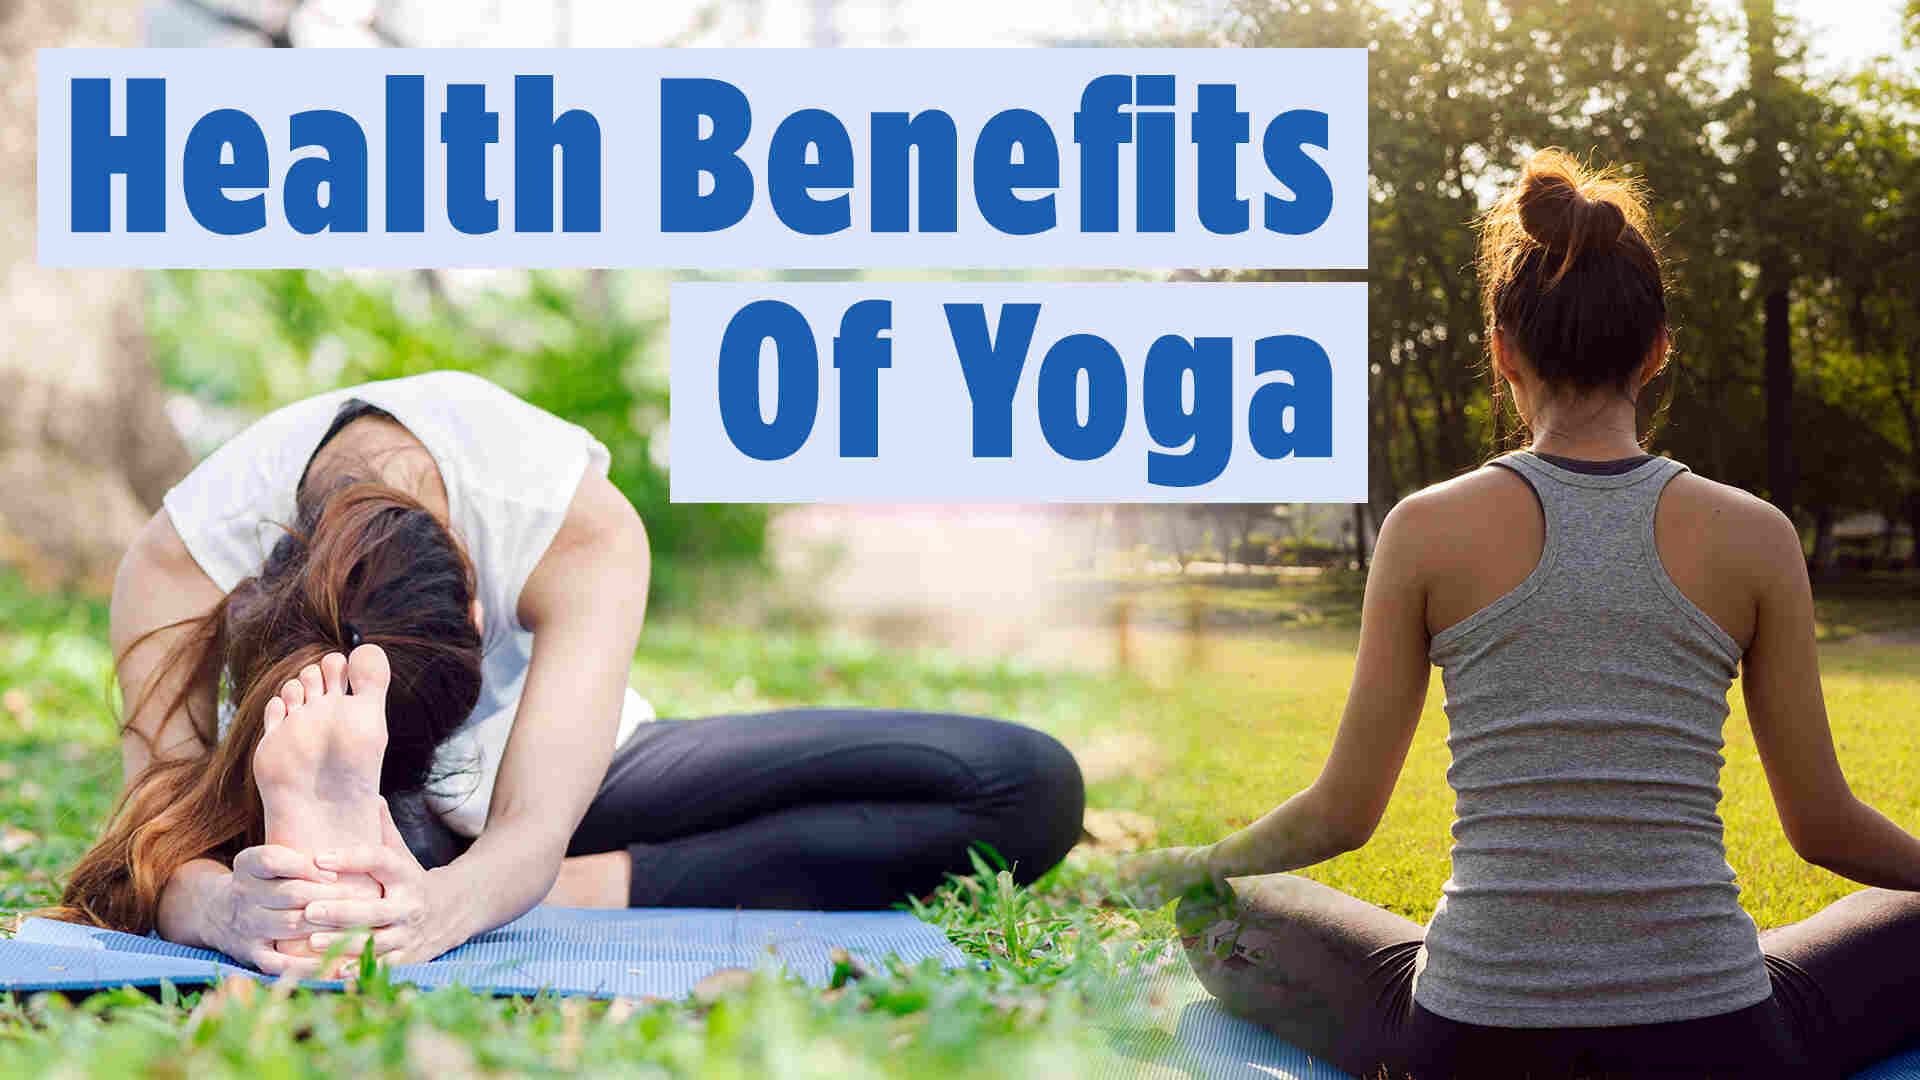 Physical Benefits of Yoga